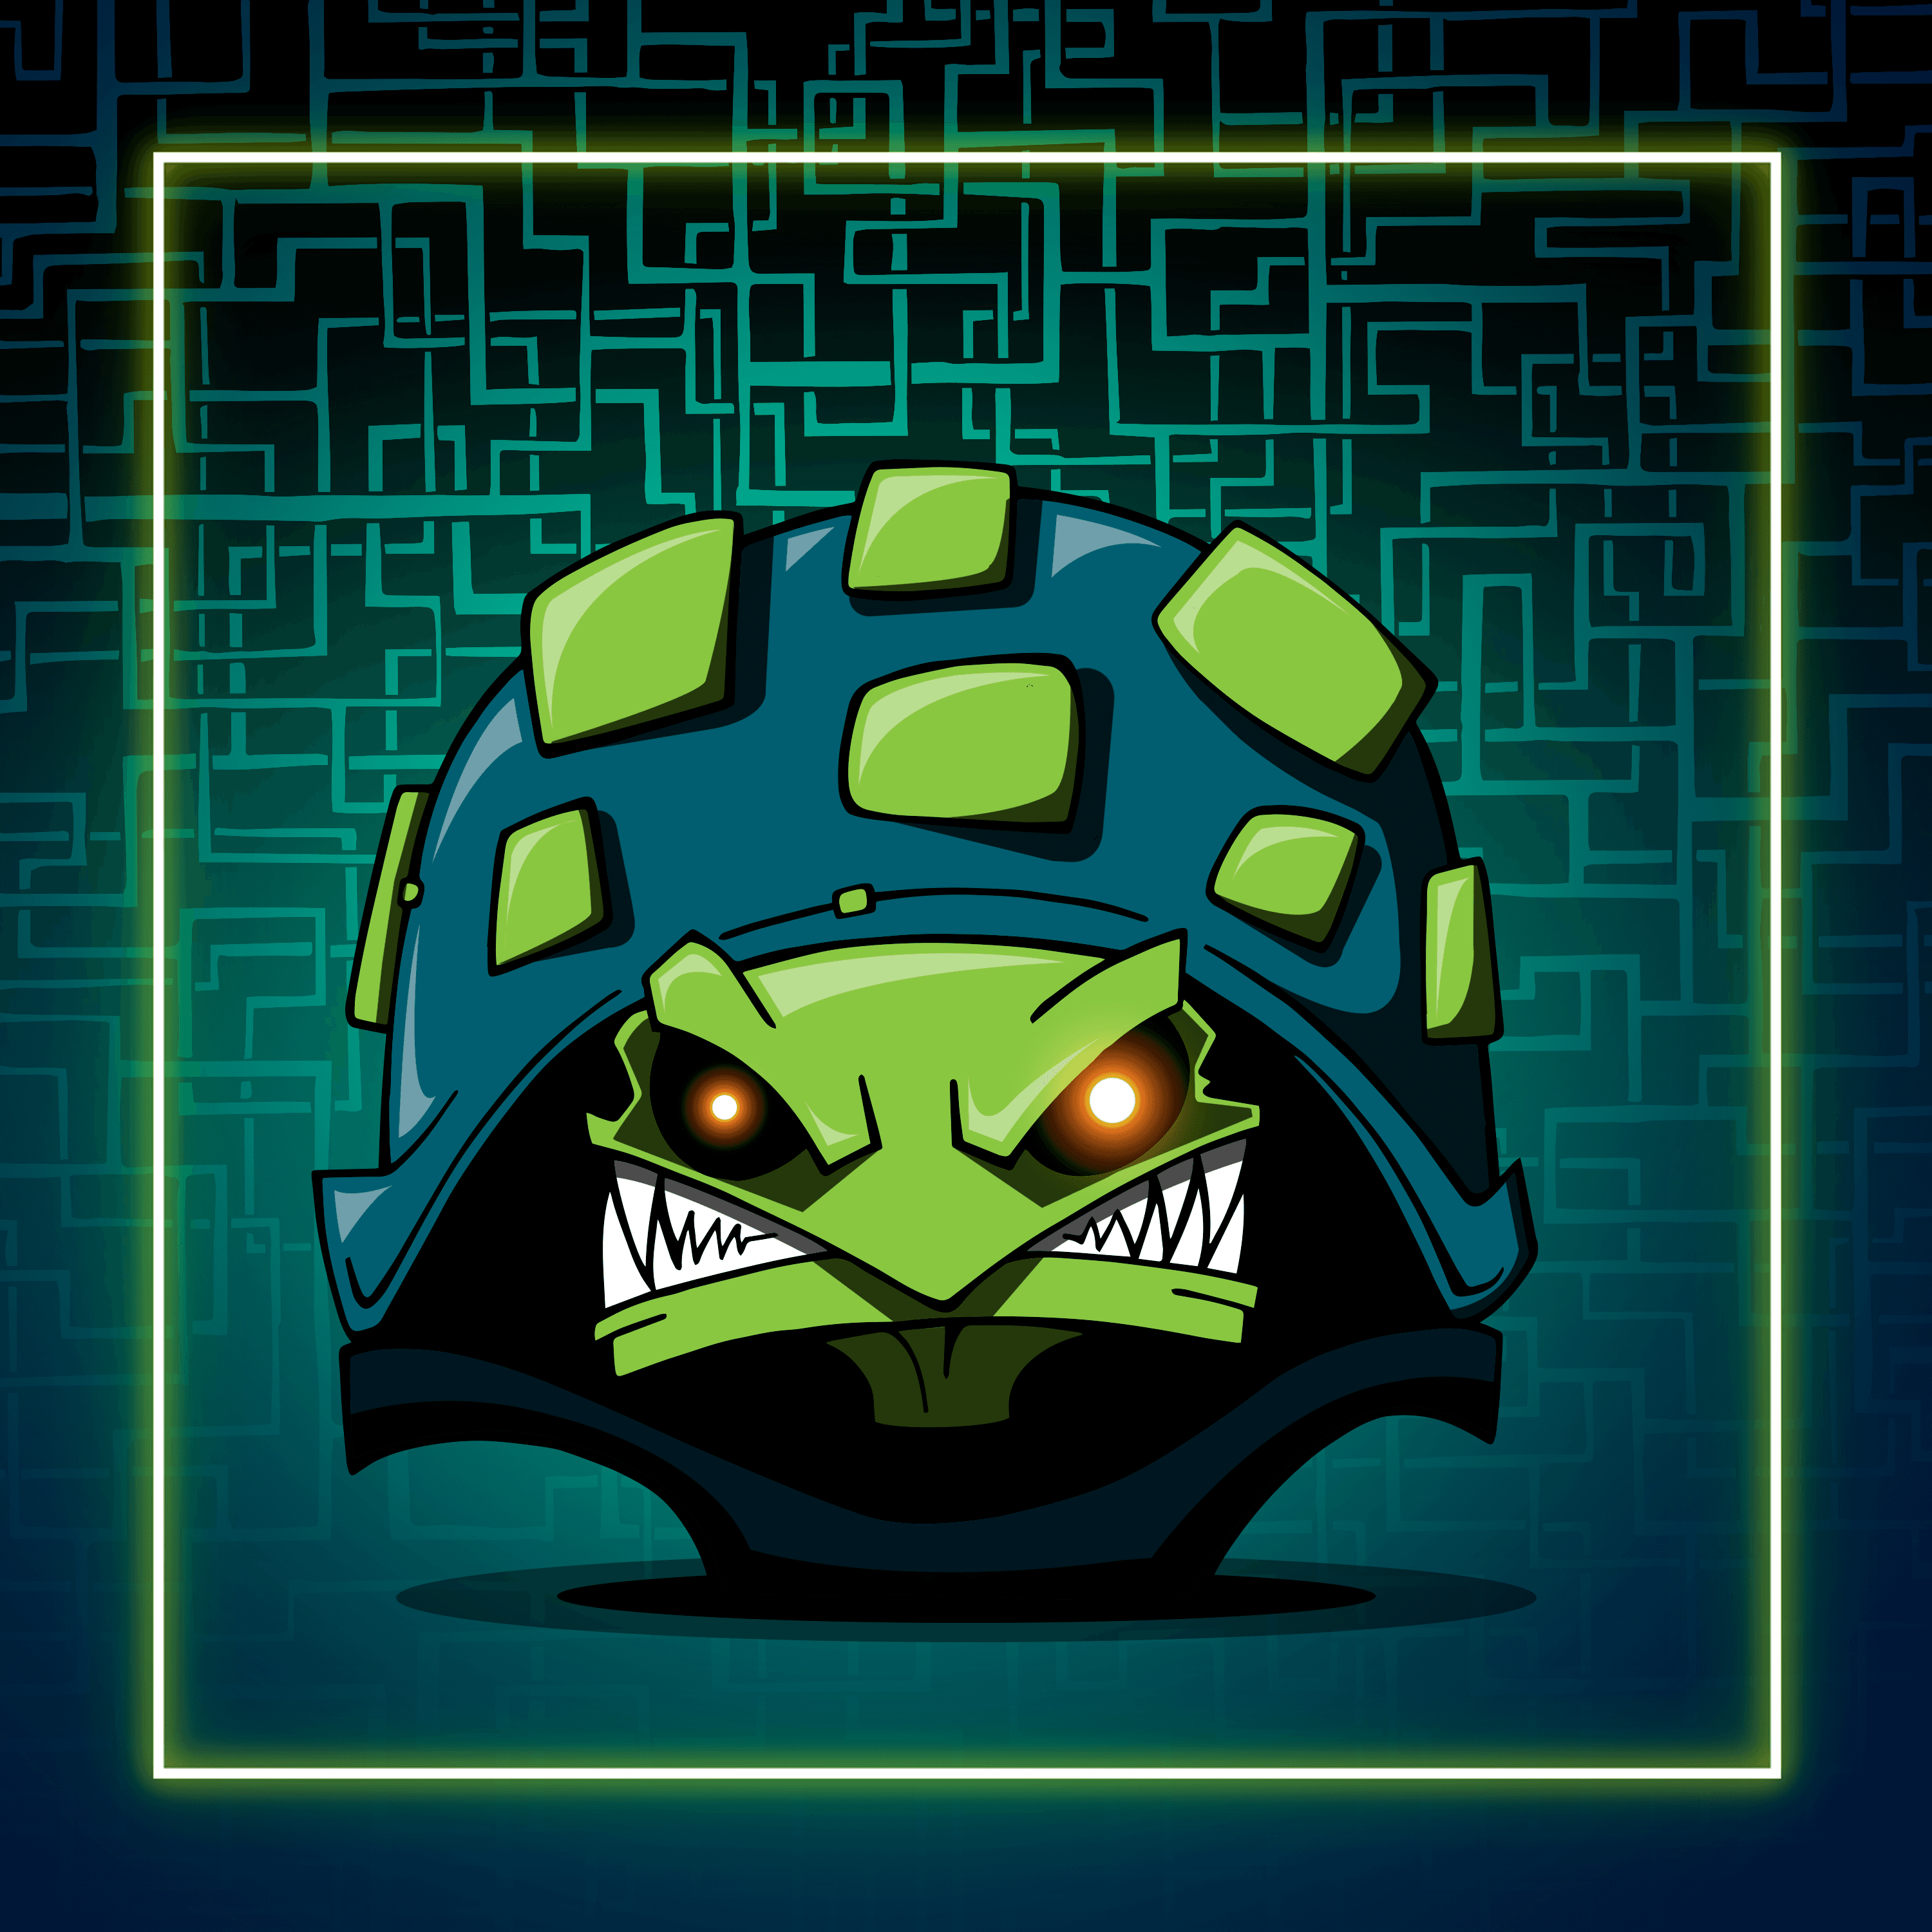 ANGRY TuRTLE